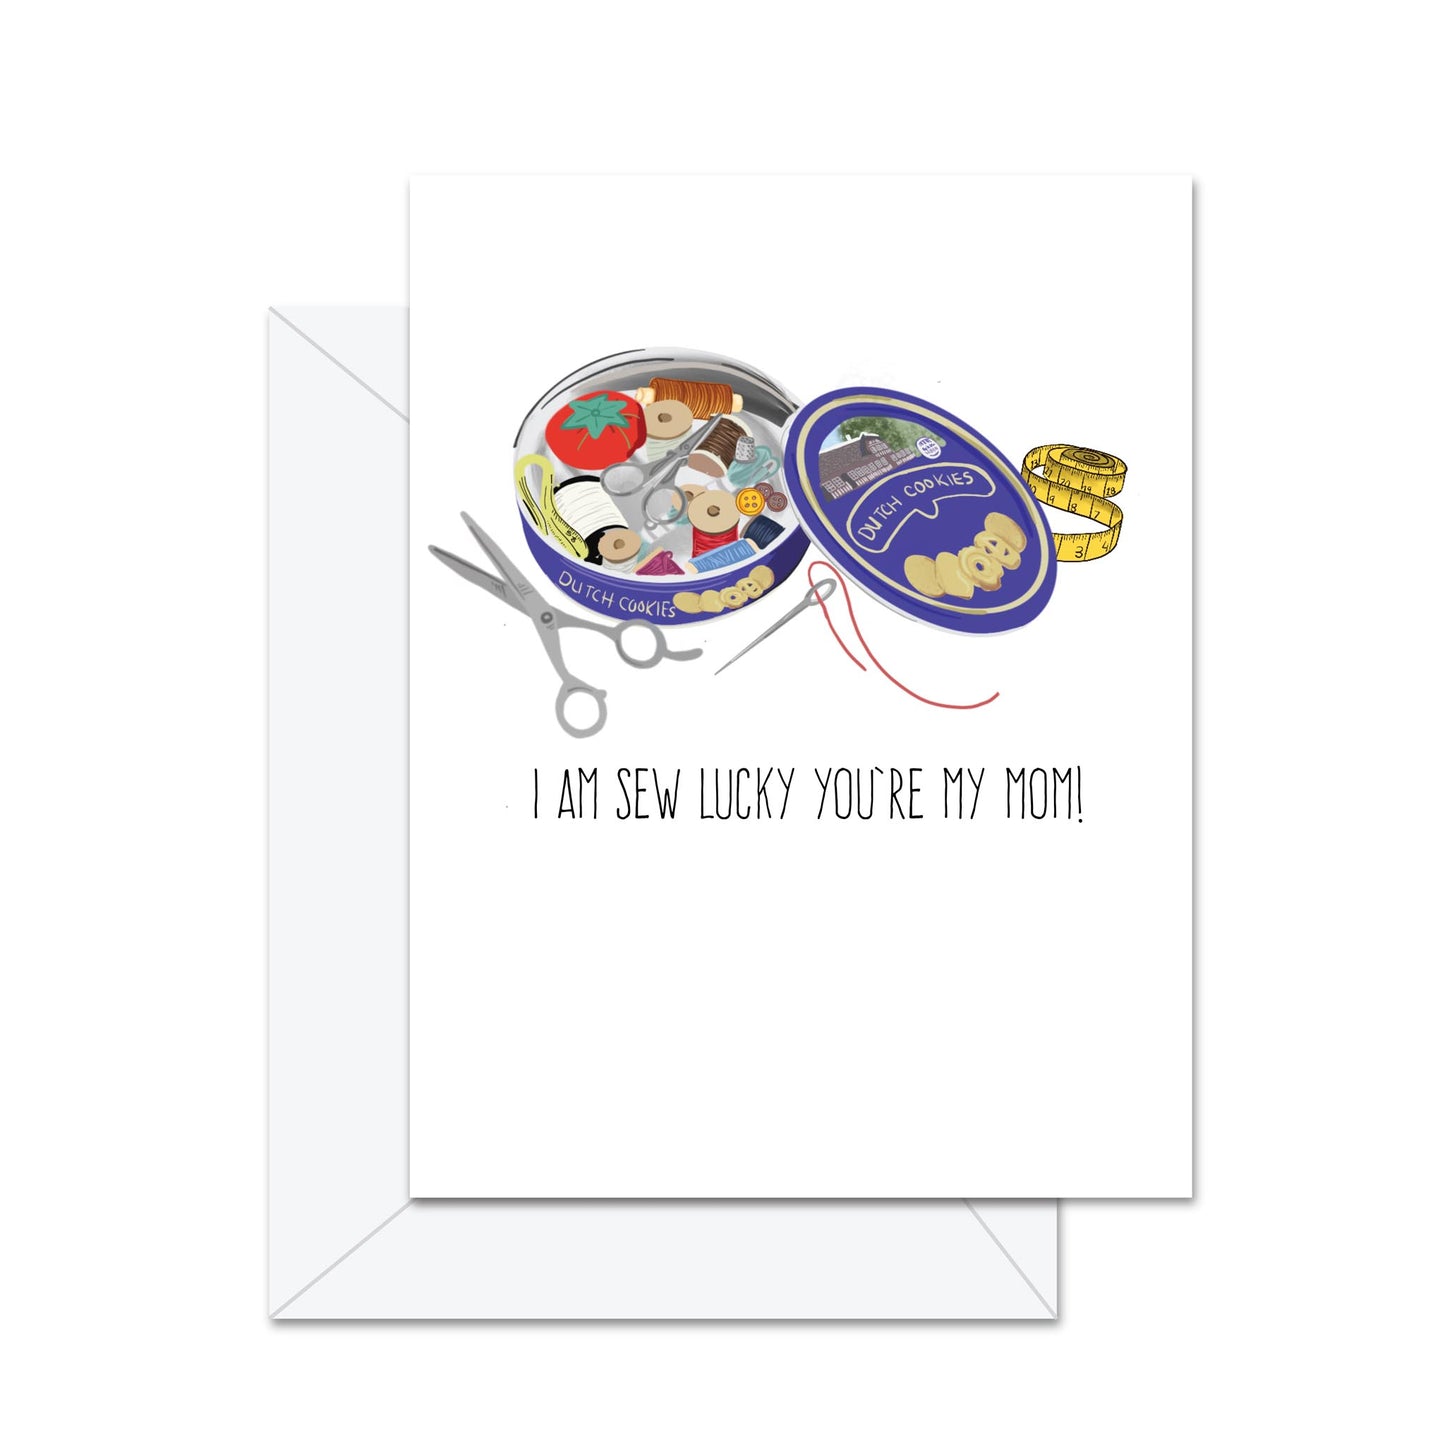 I Am Sew Lucky You're My Mom - Greeting Card